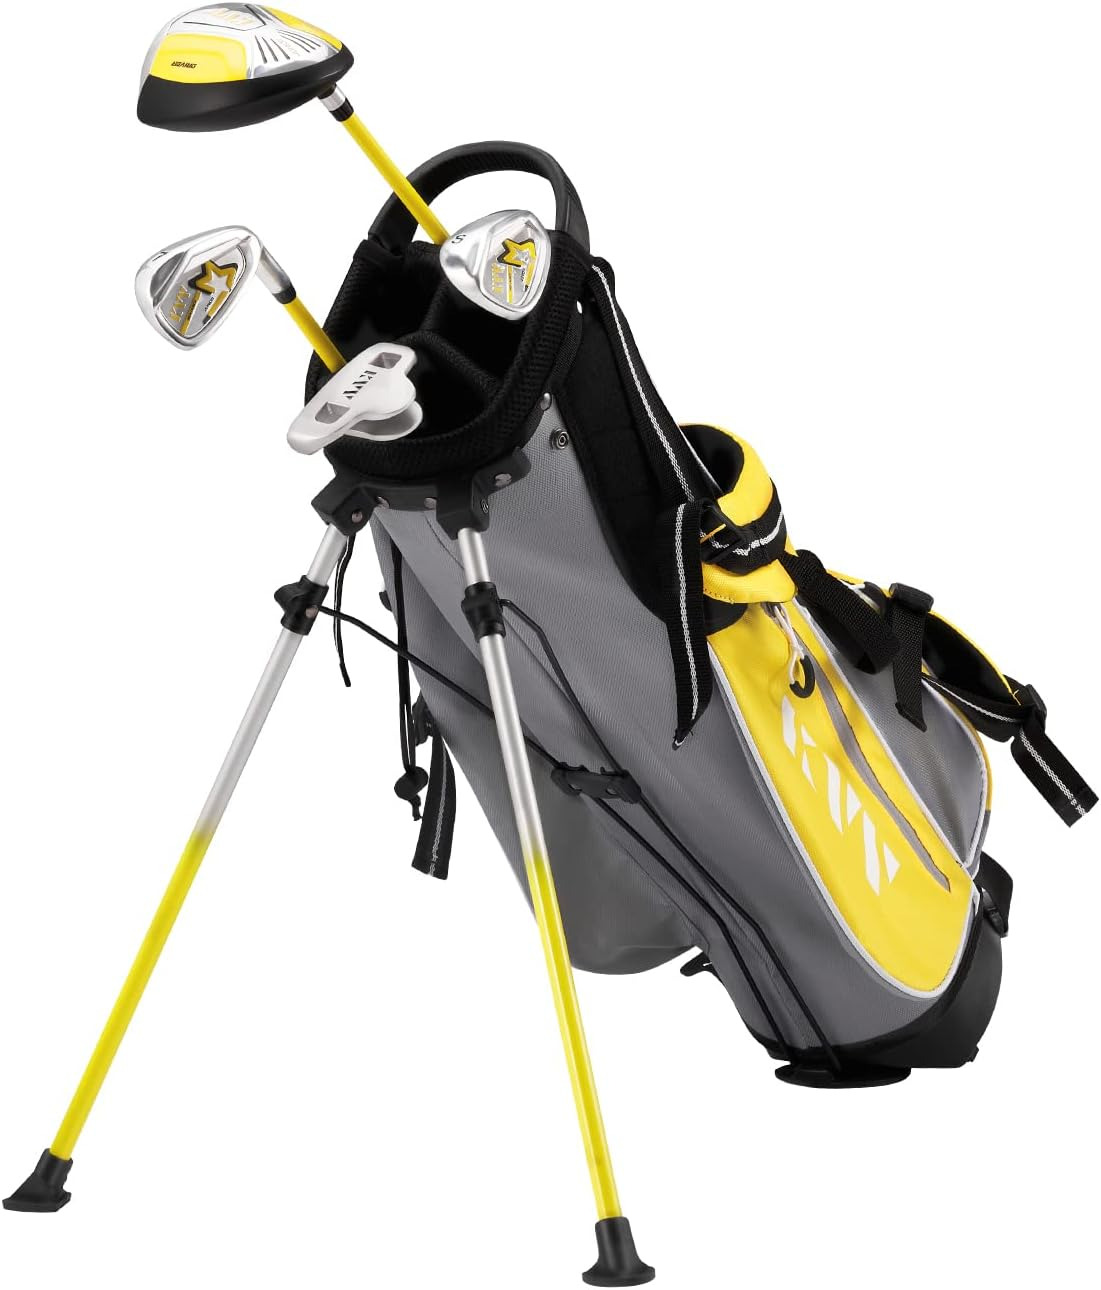 Junior Complete Golf Club Set for Kids/Children Right Hand, Includes Oversize Dr